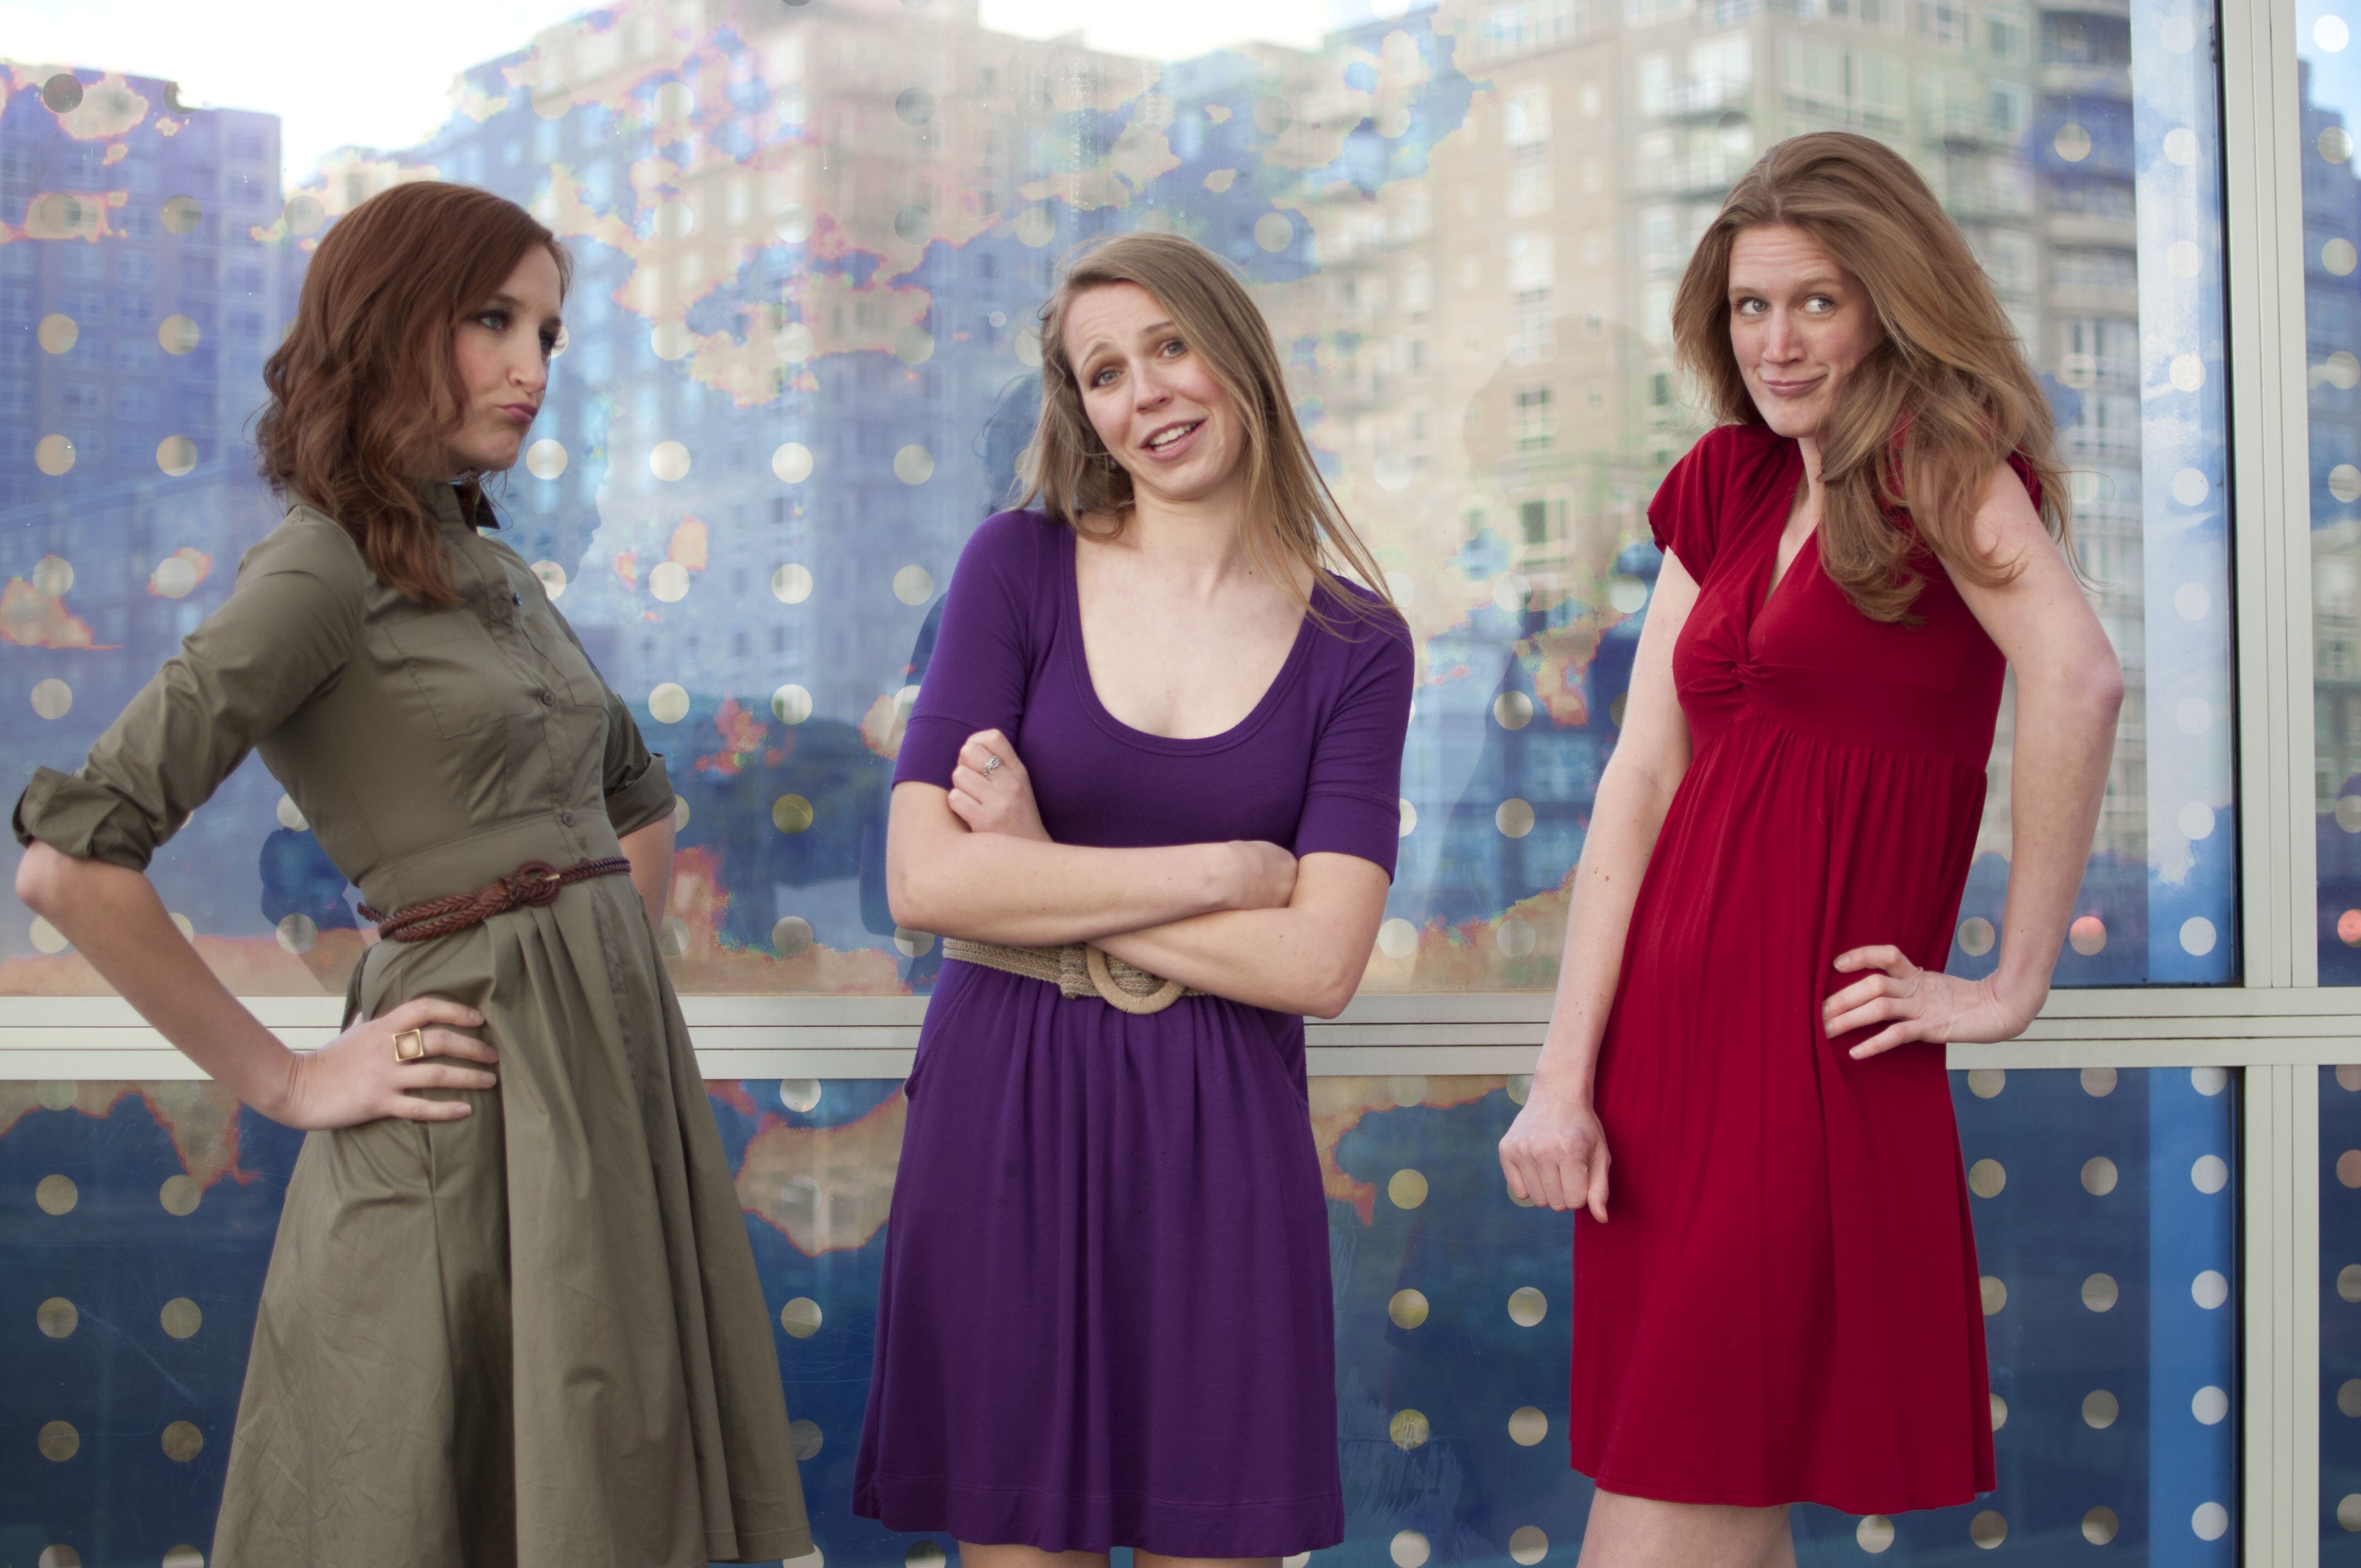 Zealyst founders Holly Robins, Britta Jacobs, and Martina Welke (Photo: Zealyst)